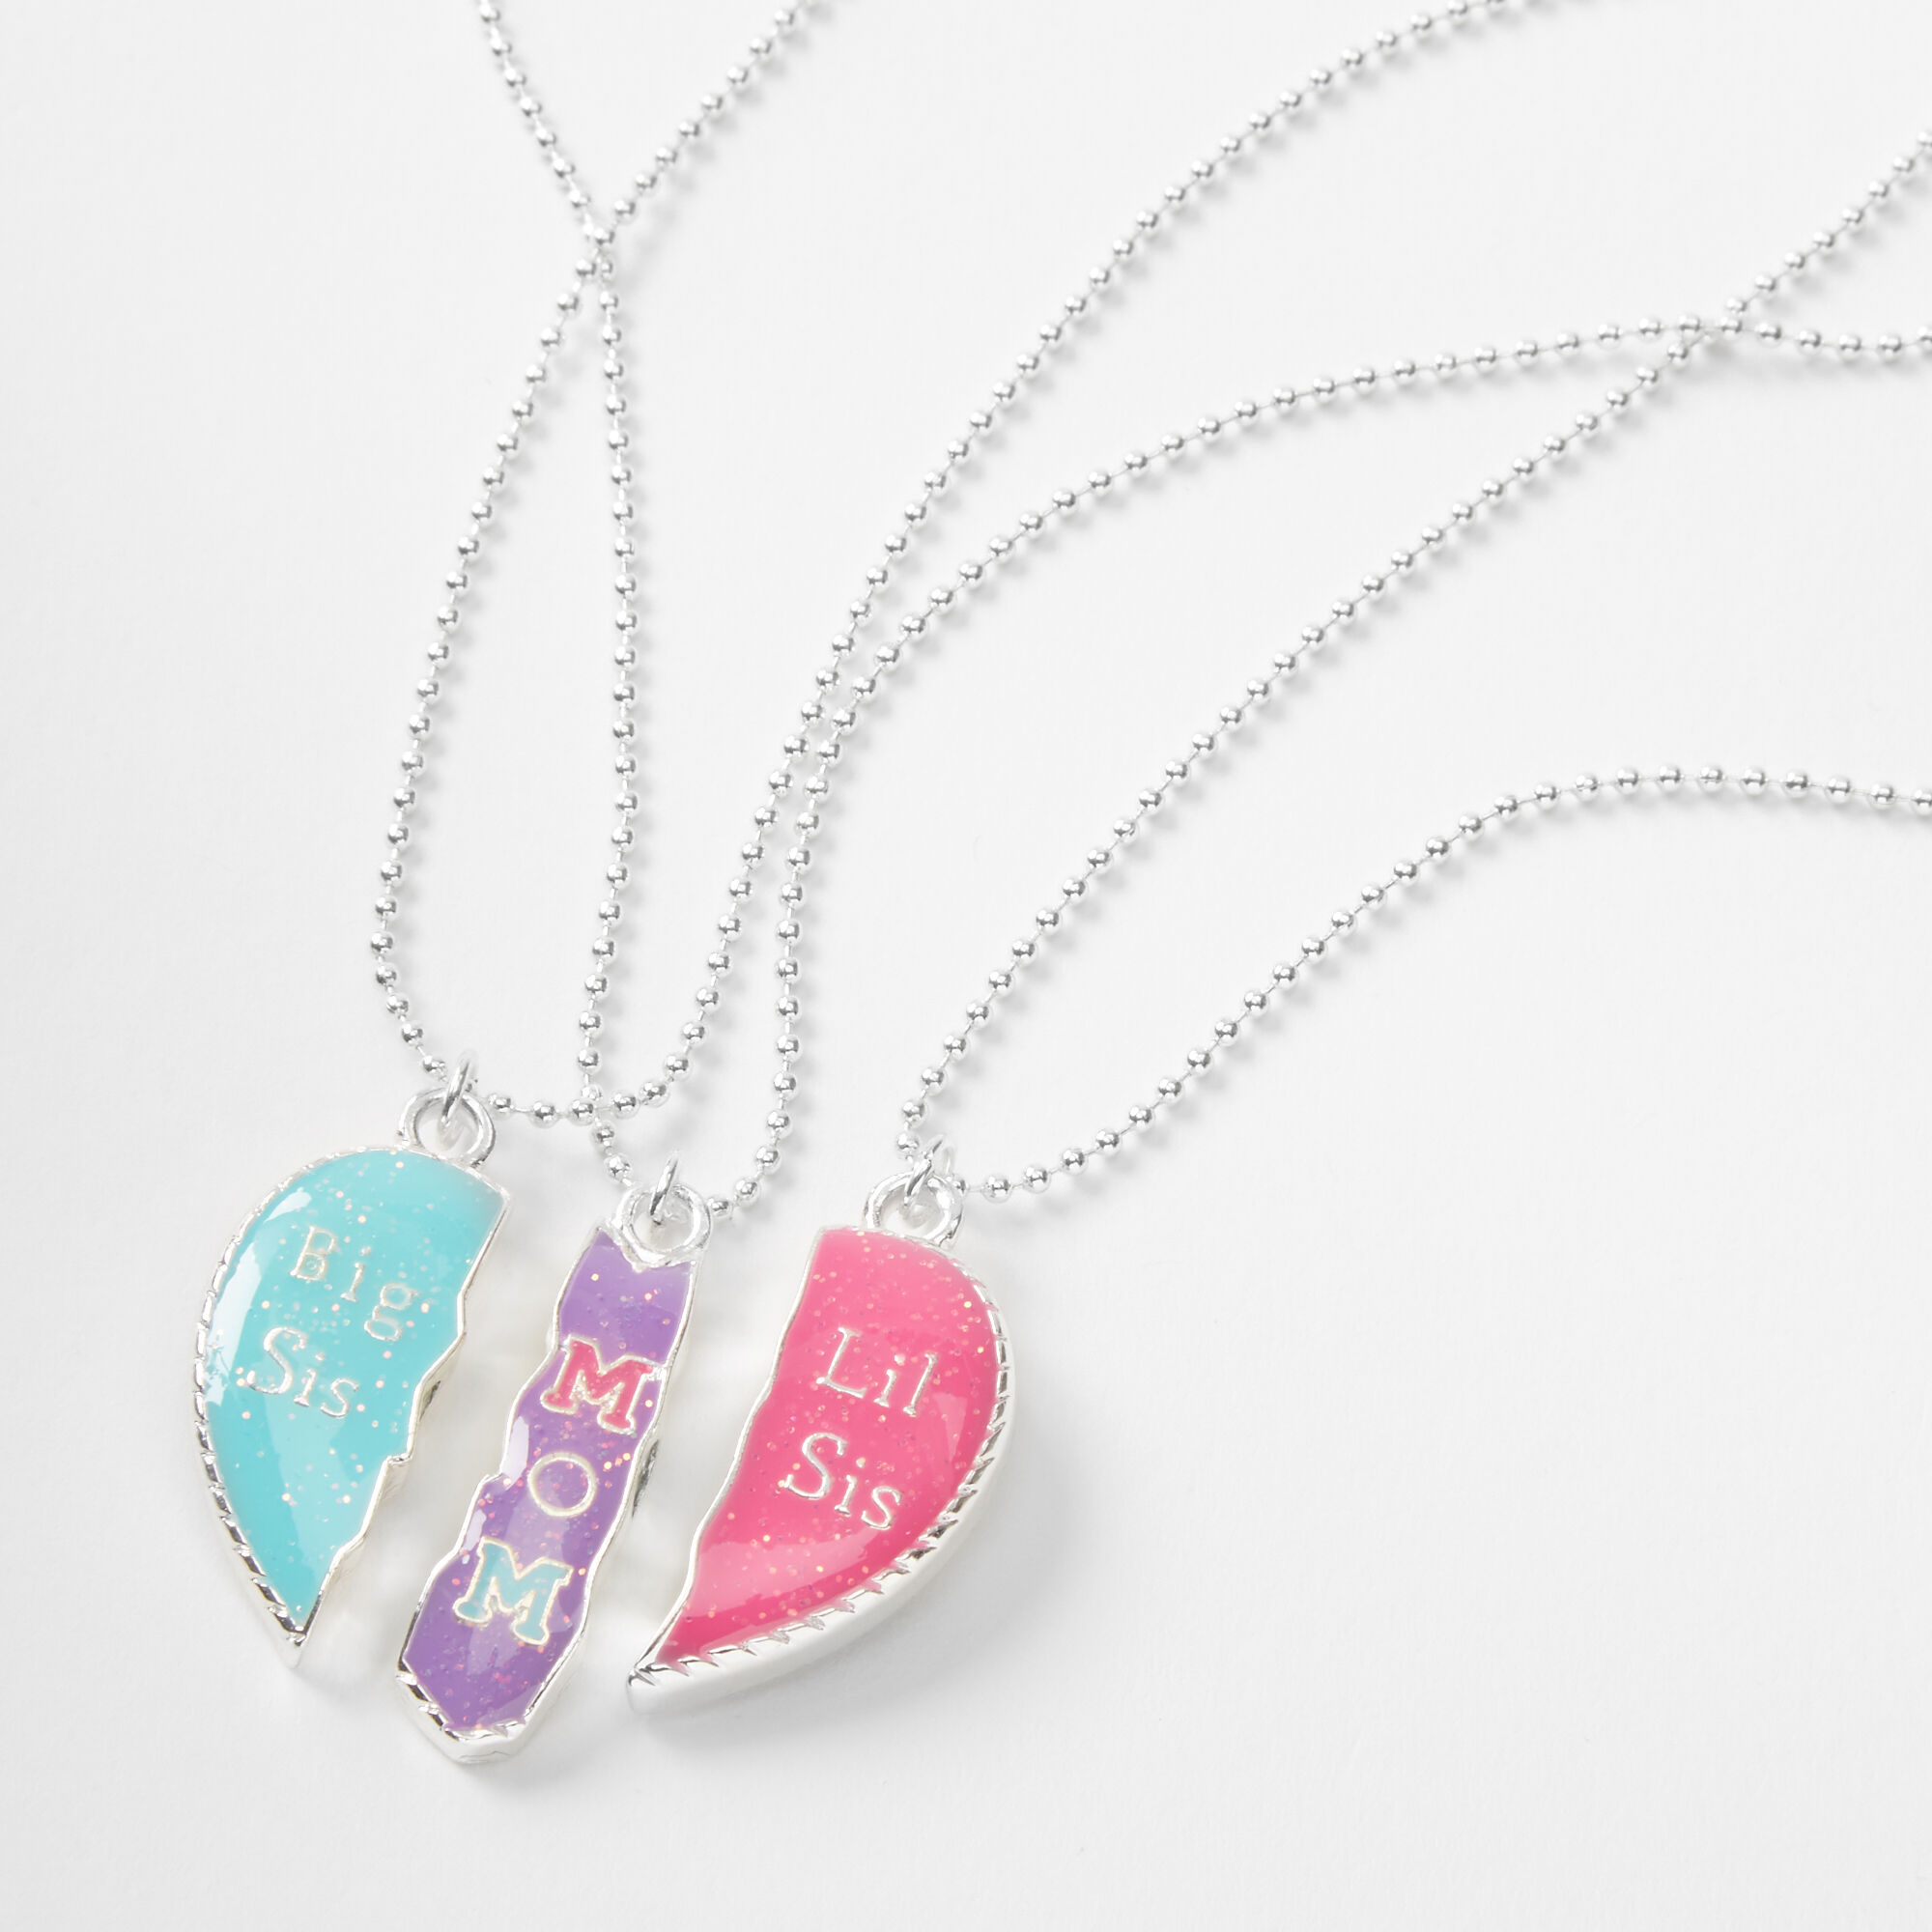 Lovecryst Family Family Pendant Necklace Set For Girls, Big Sisters, Little  Mom Perfect BFF Friendship Jewelry Gift From Yanzhoucheng, $12.02 |  DHgate.Com